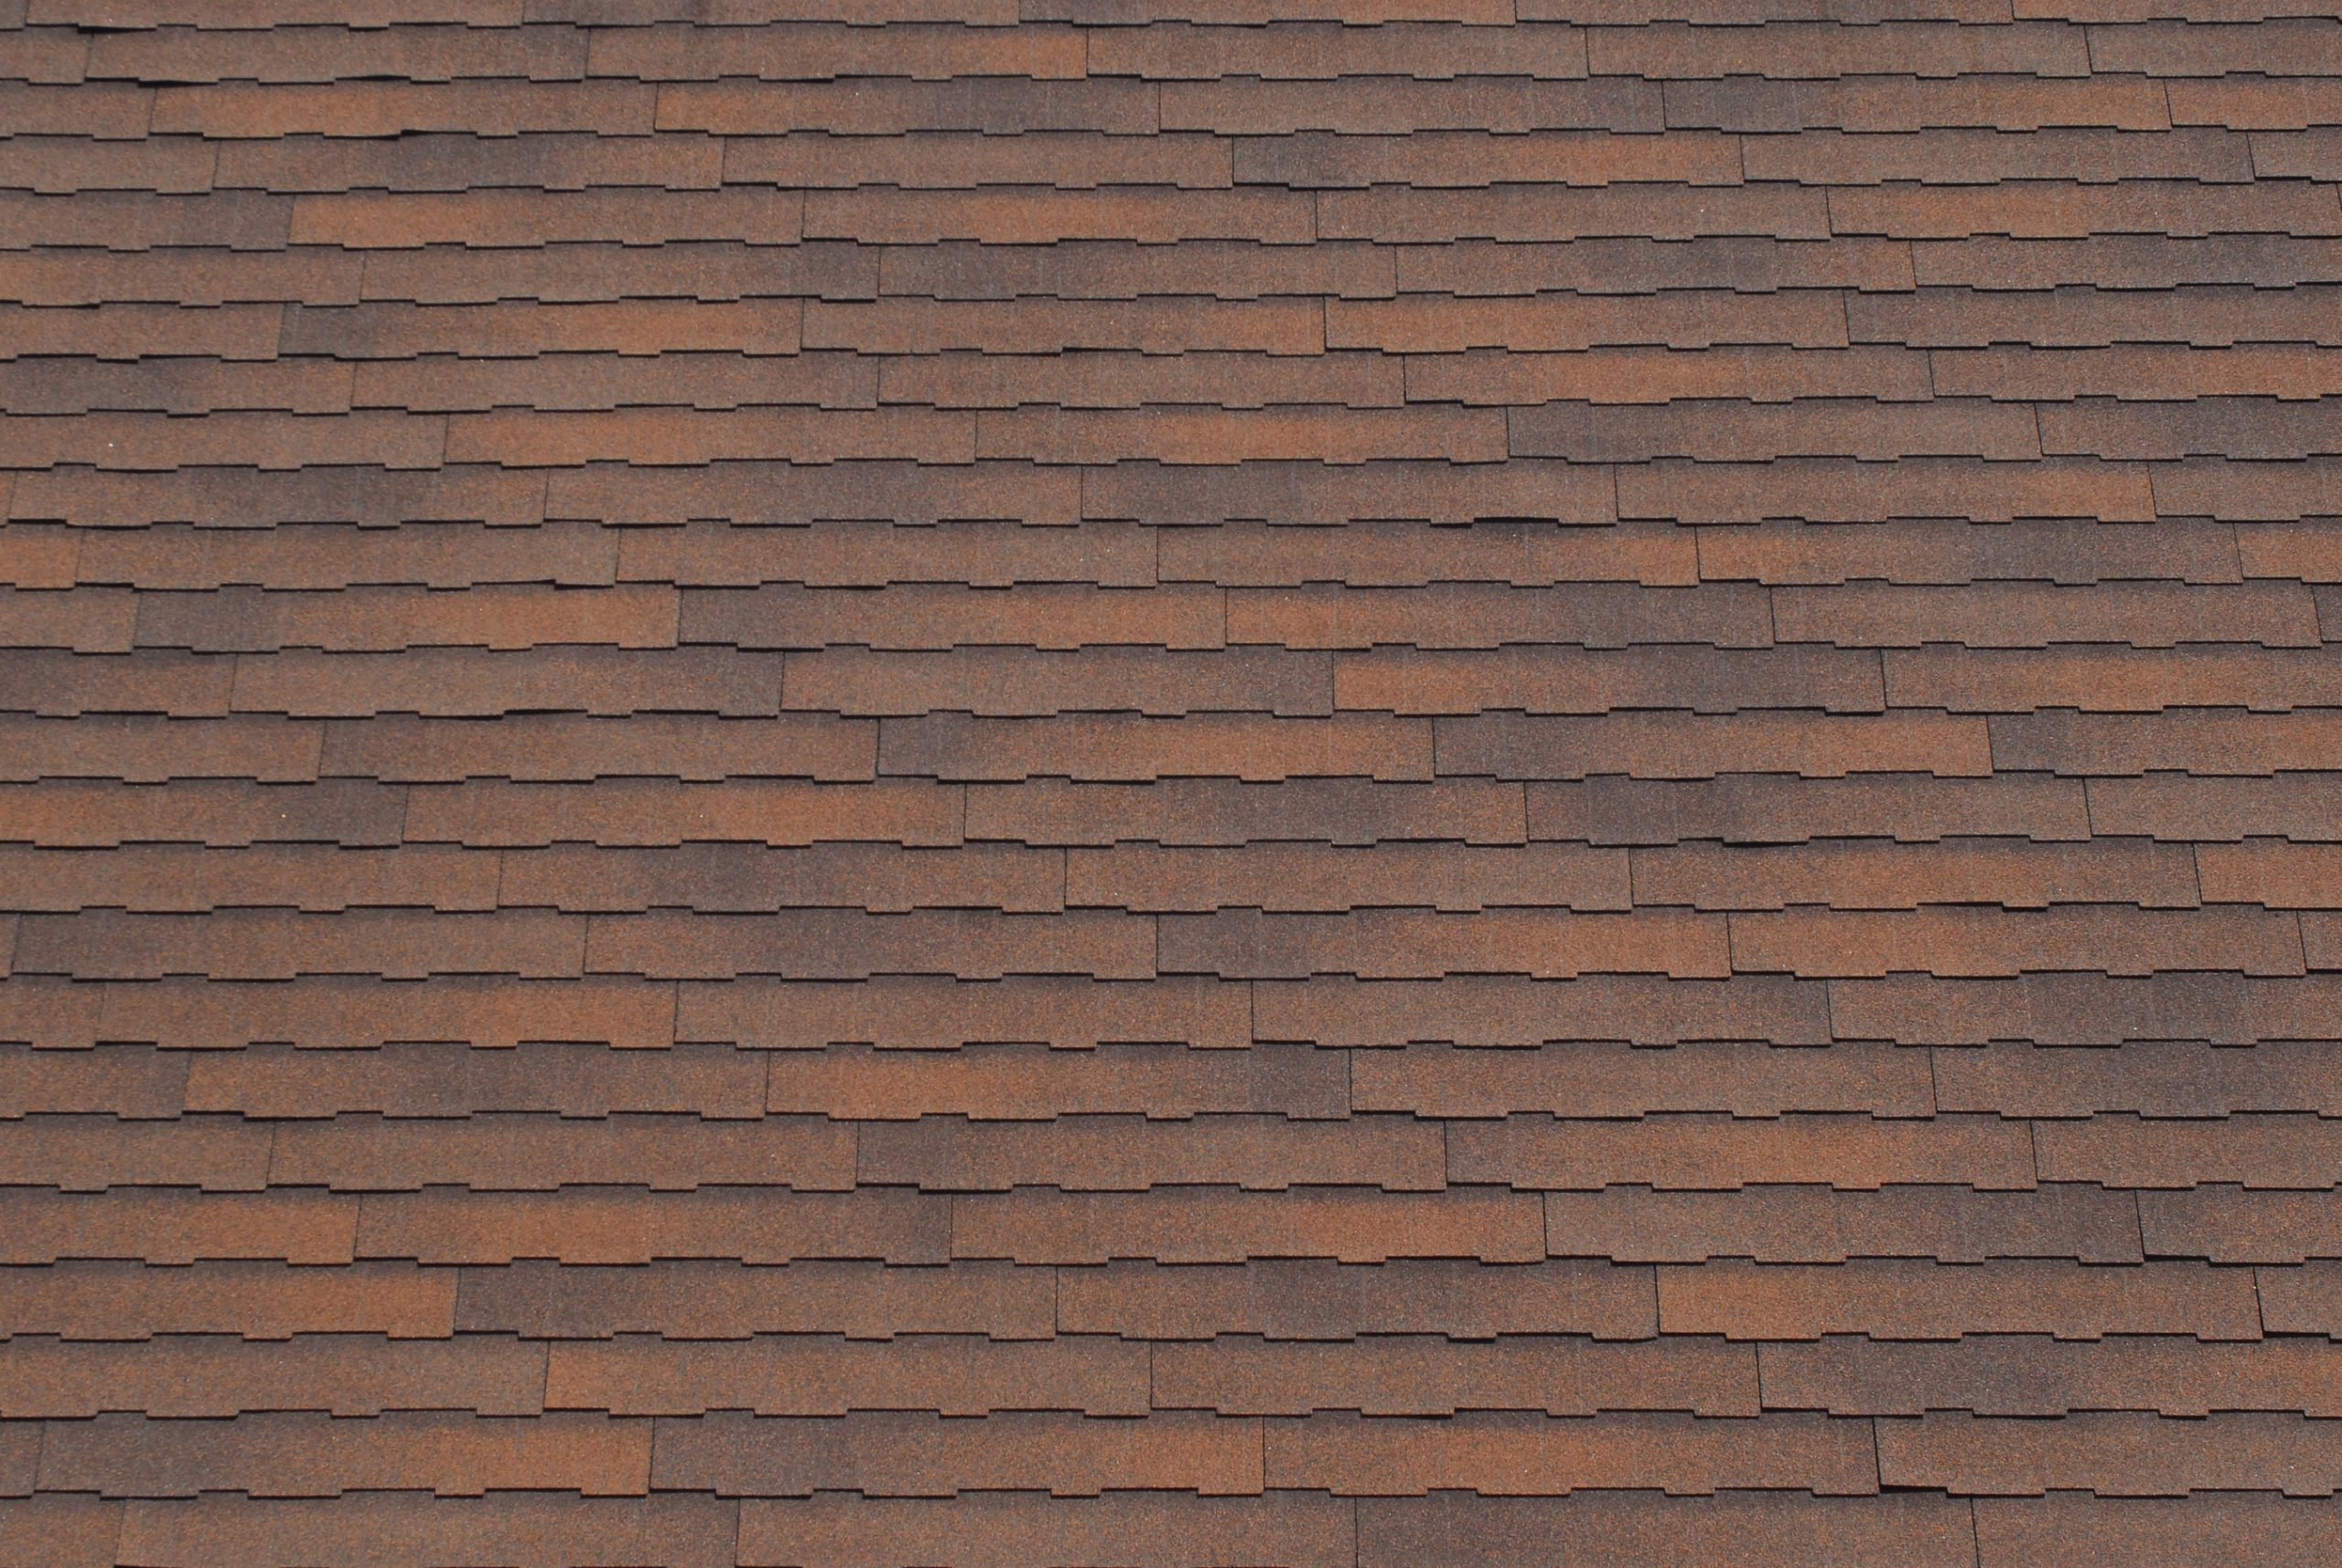 What Are Composite Roof Shingles Made Of?